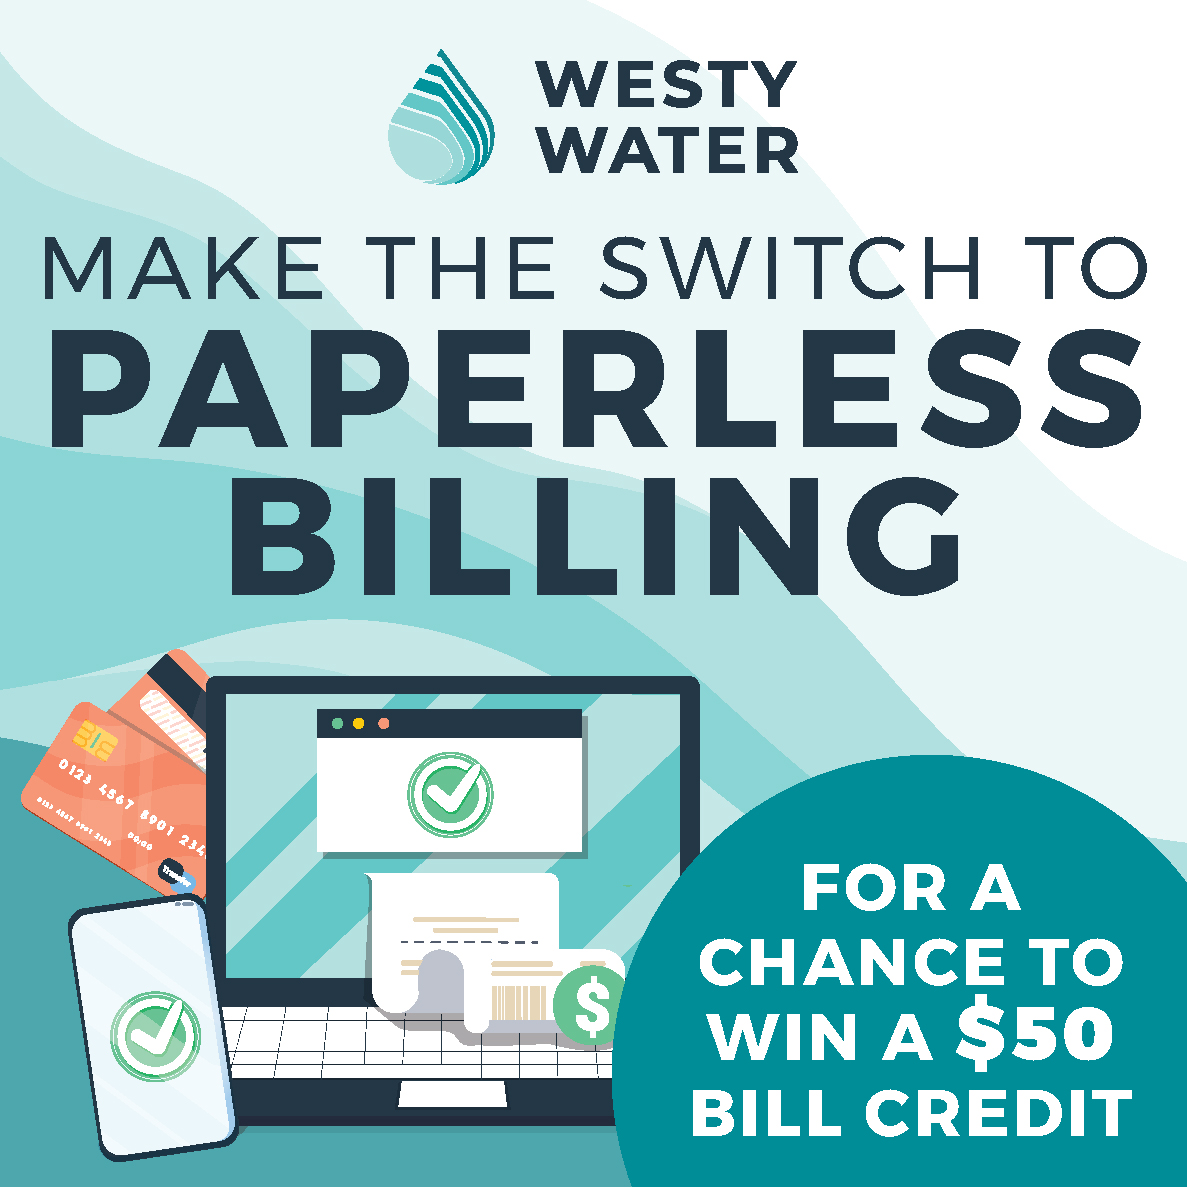 📨 Sign up for paperless billing, and earn the chance to win a prize! All paperless billing subscribers will be entered into a drawing for a $50 credit off their water bill. Two lucky winners will be randomly chosen each month until Dec. 2024. Sign up at: westywater.smartcmobile.com/Portal/